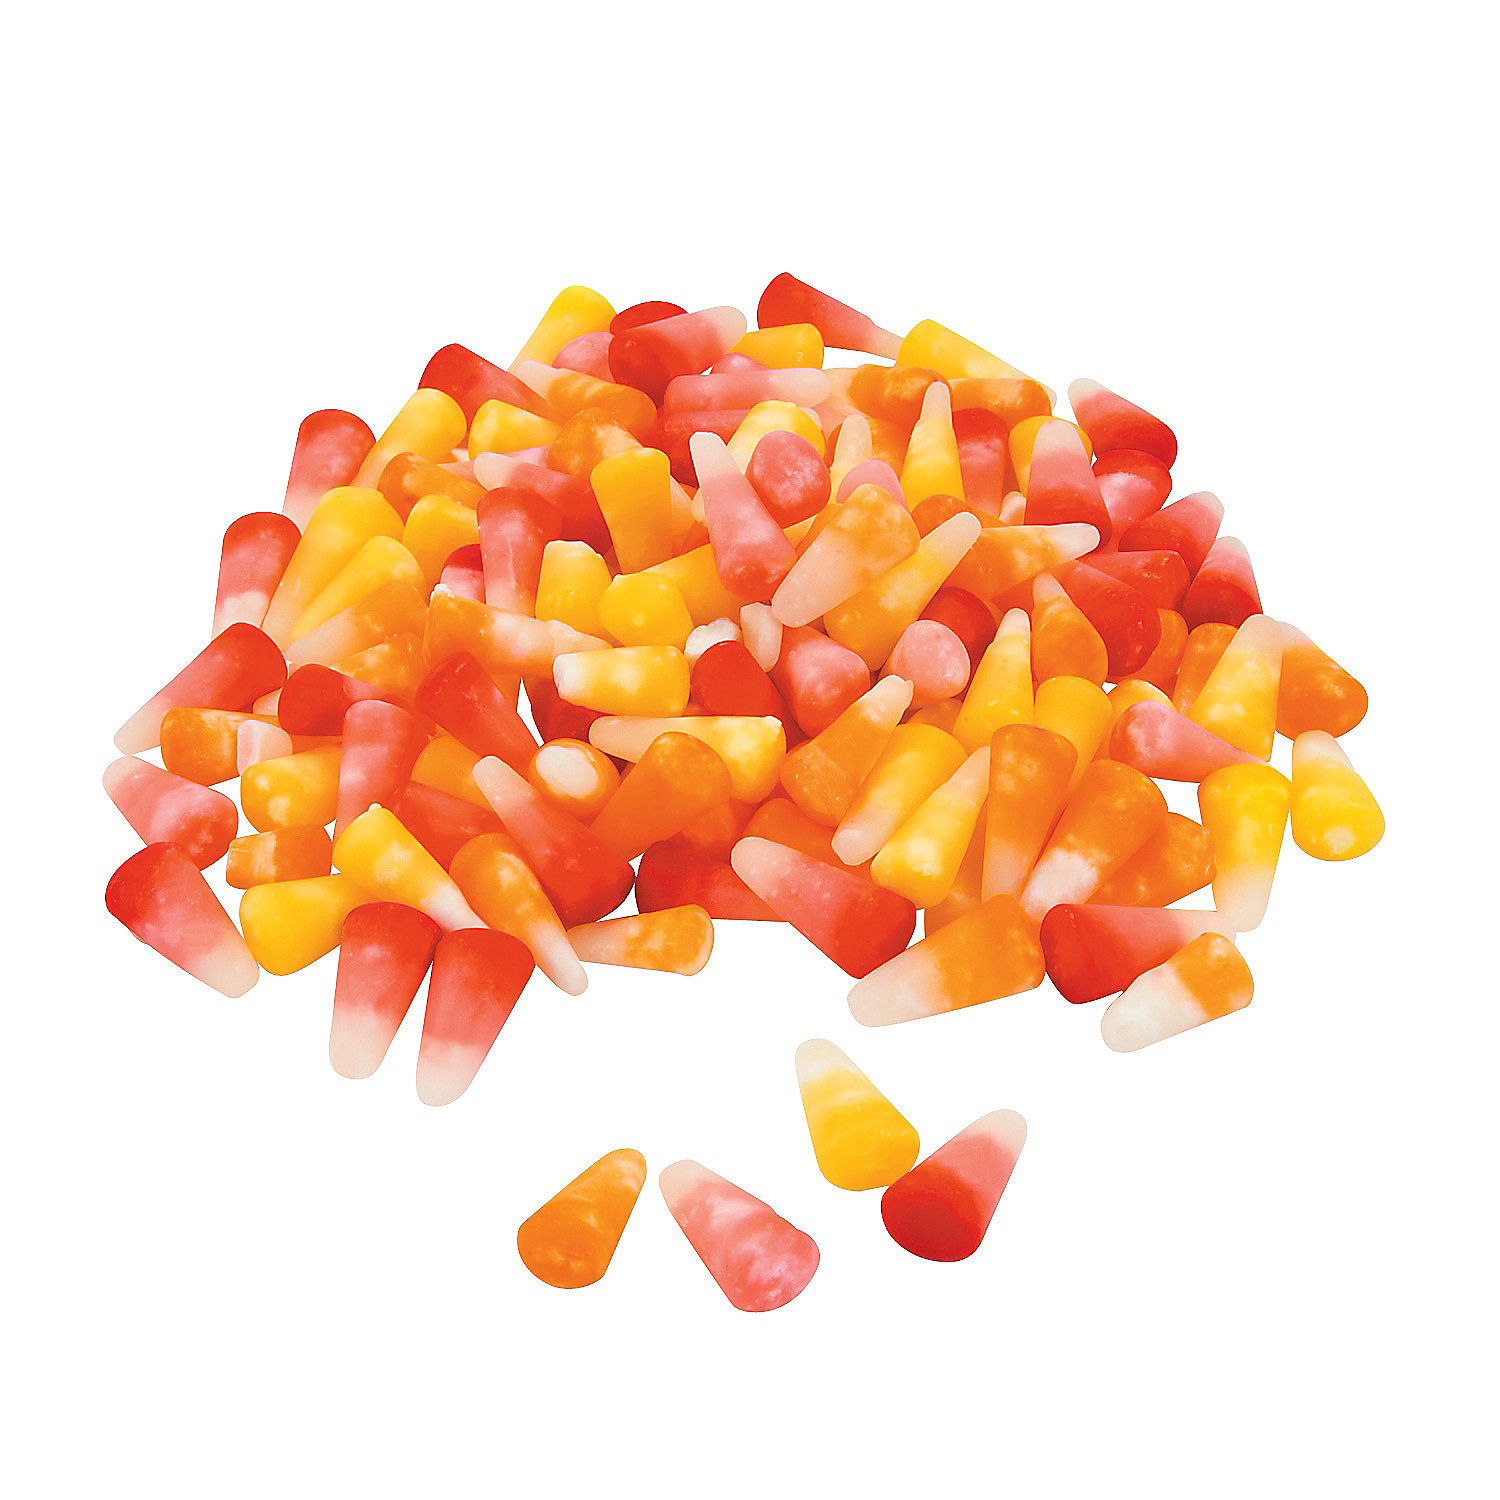 Starburst Candy Corn
 Starburst Candy Corn Soft & Chewy Candy Candy Party